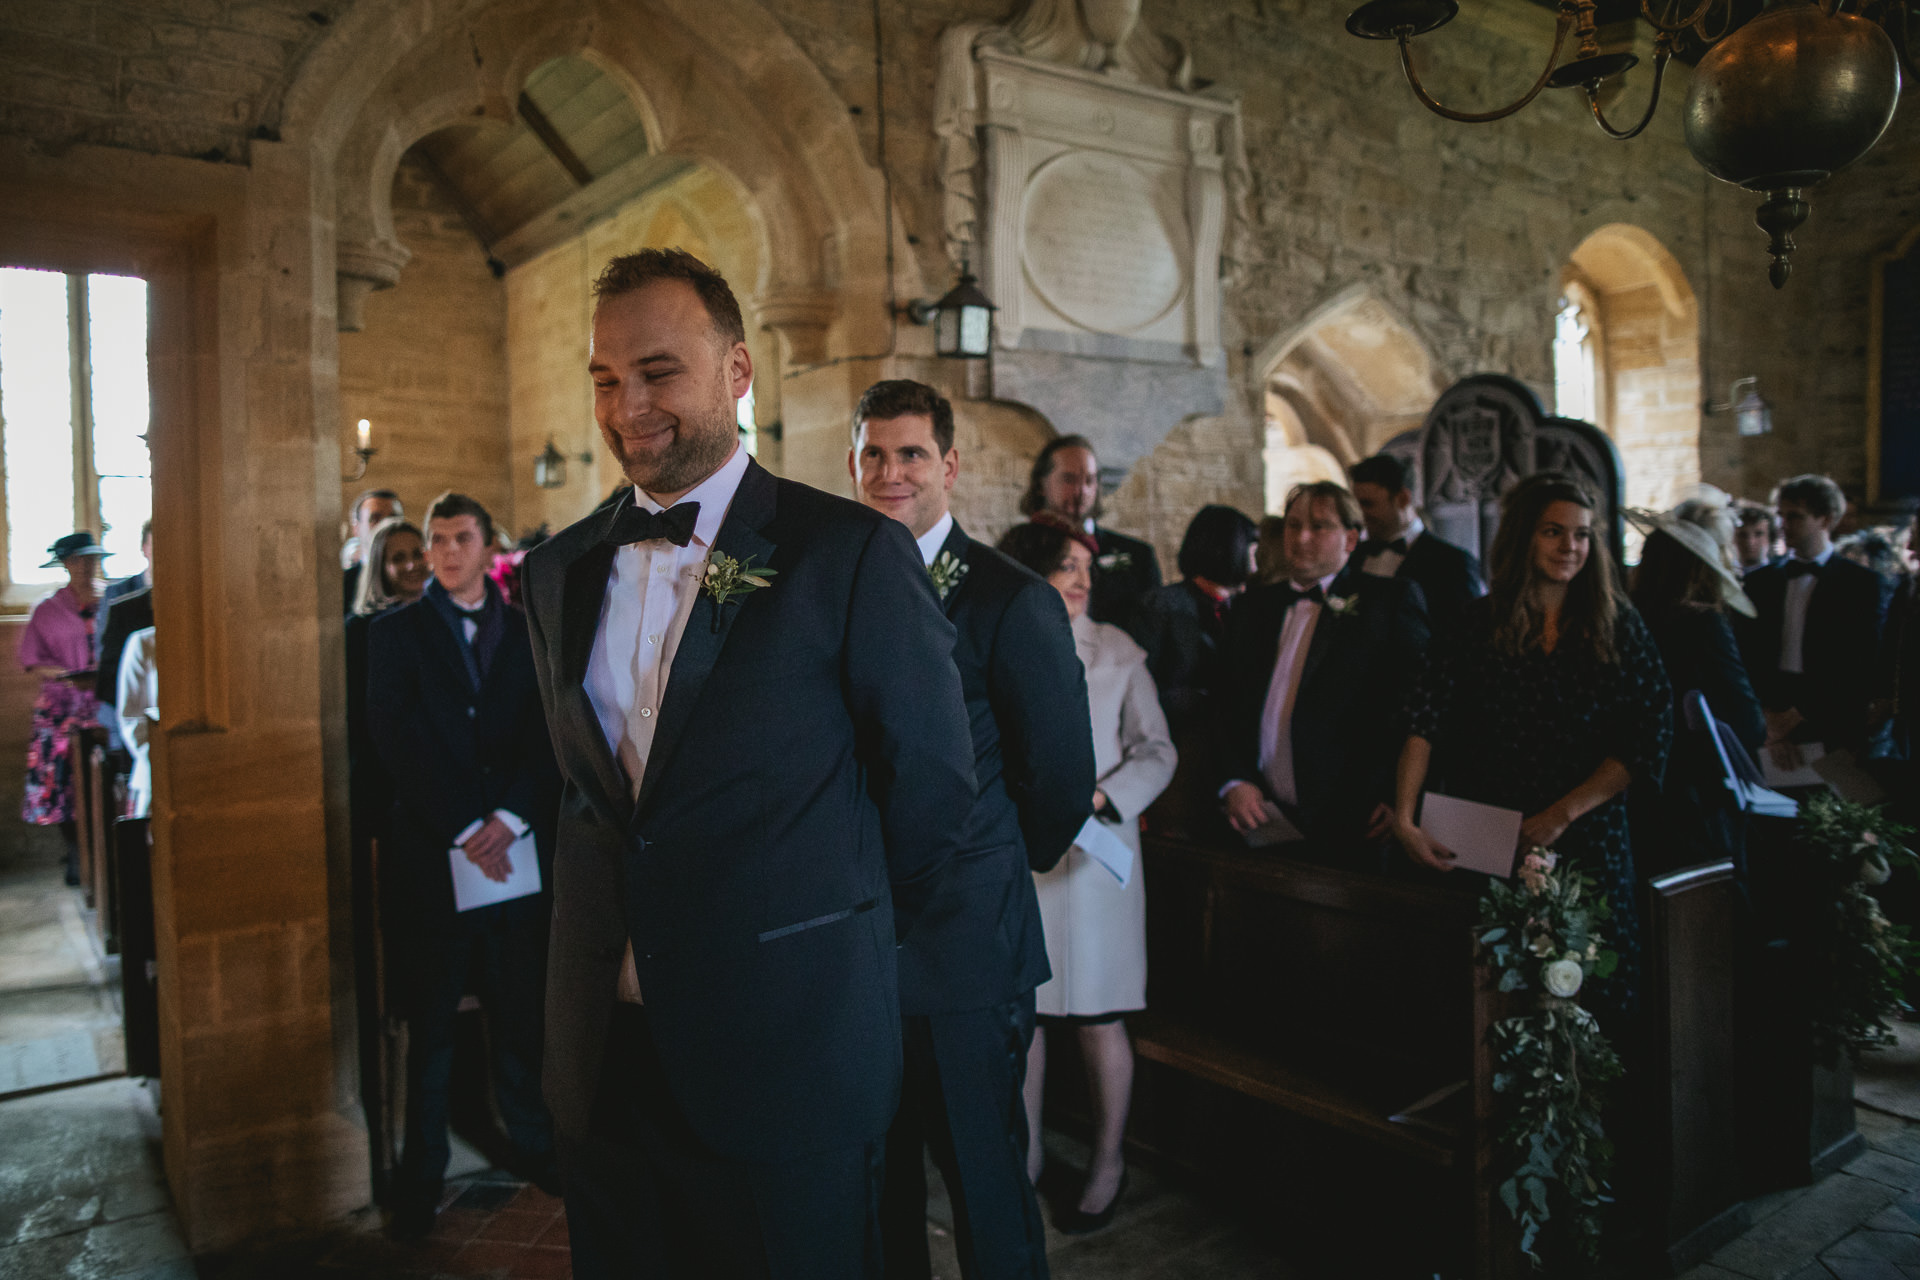 Groom waiting at the front of the church